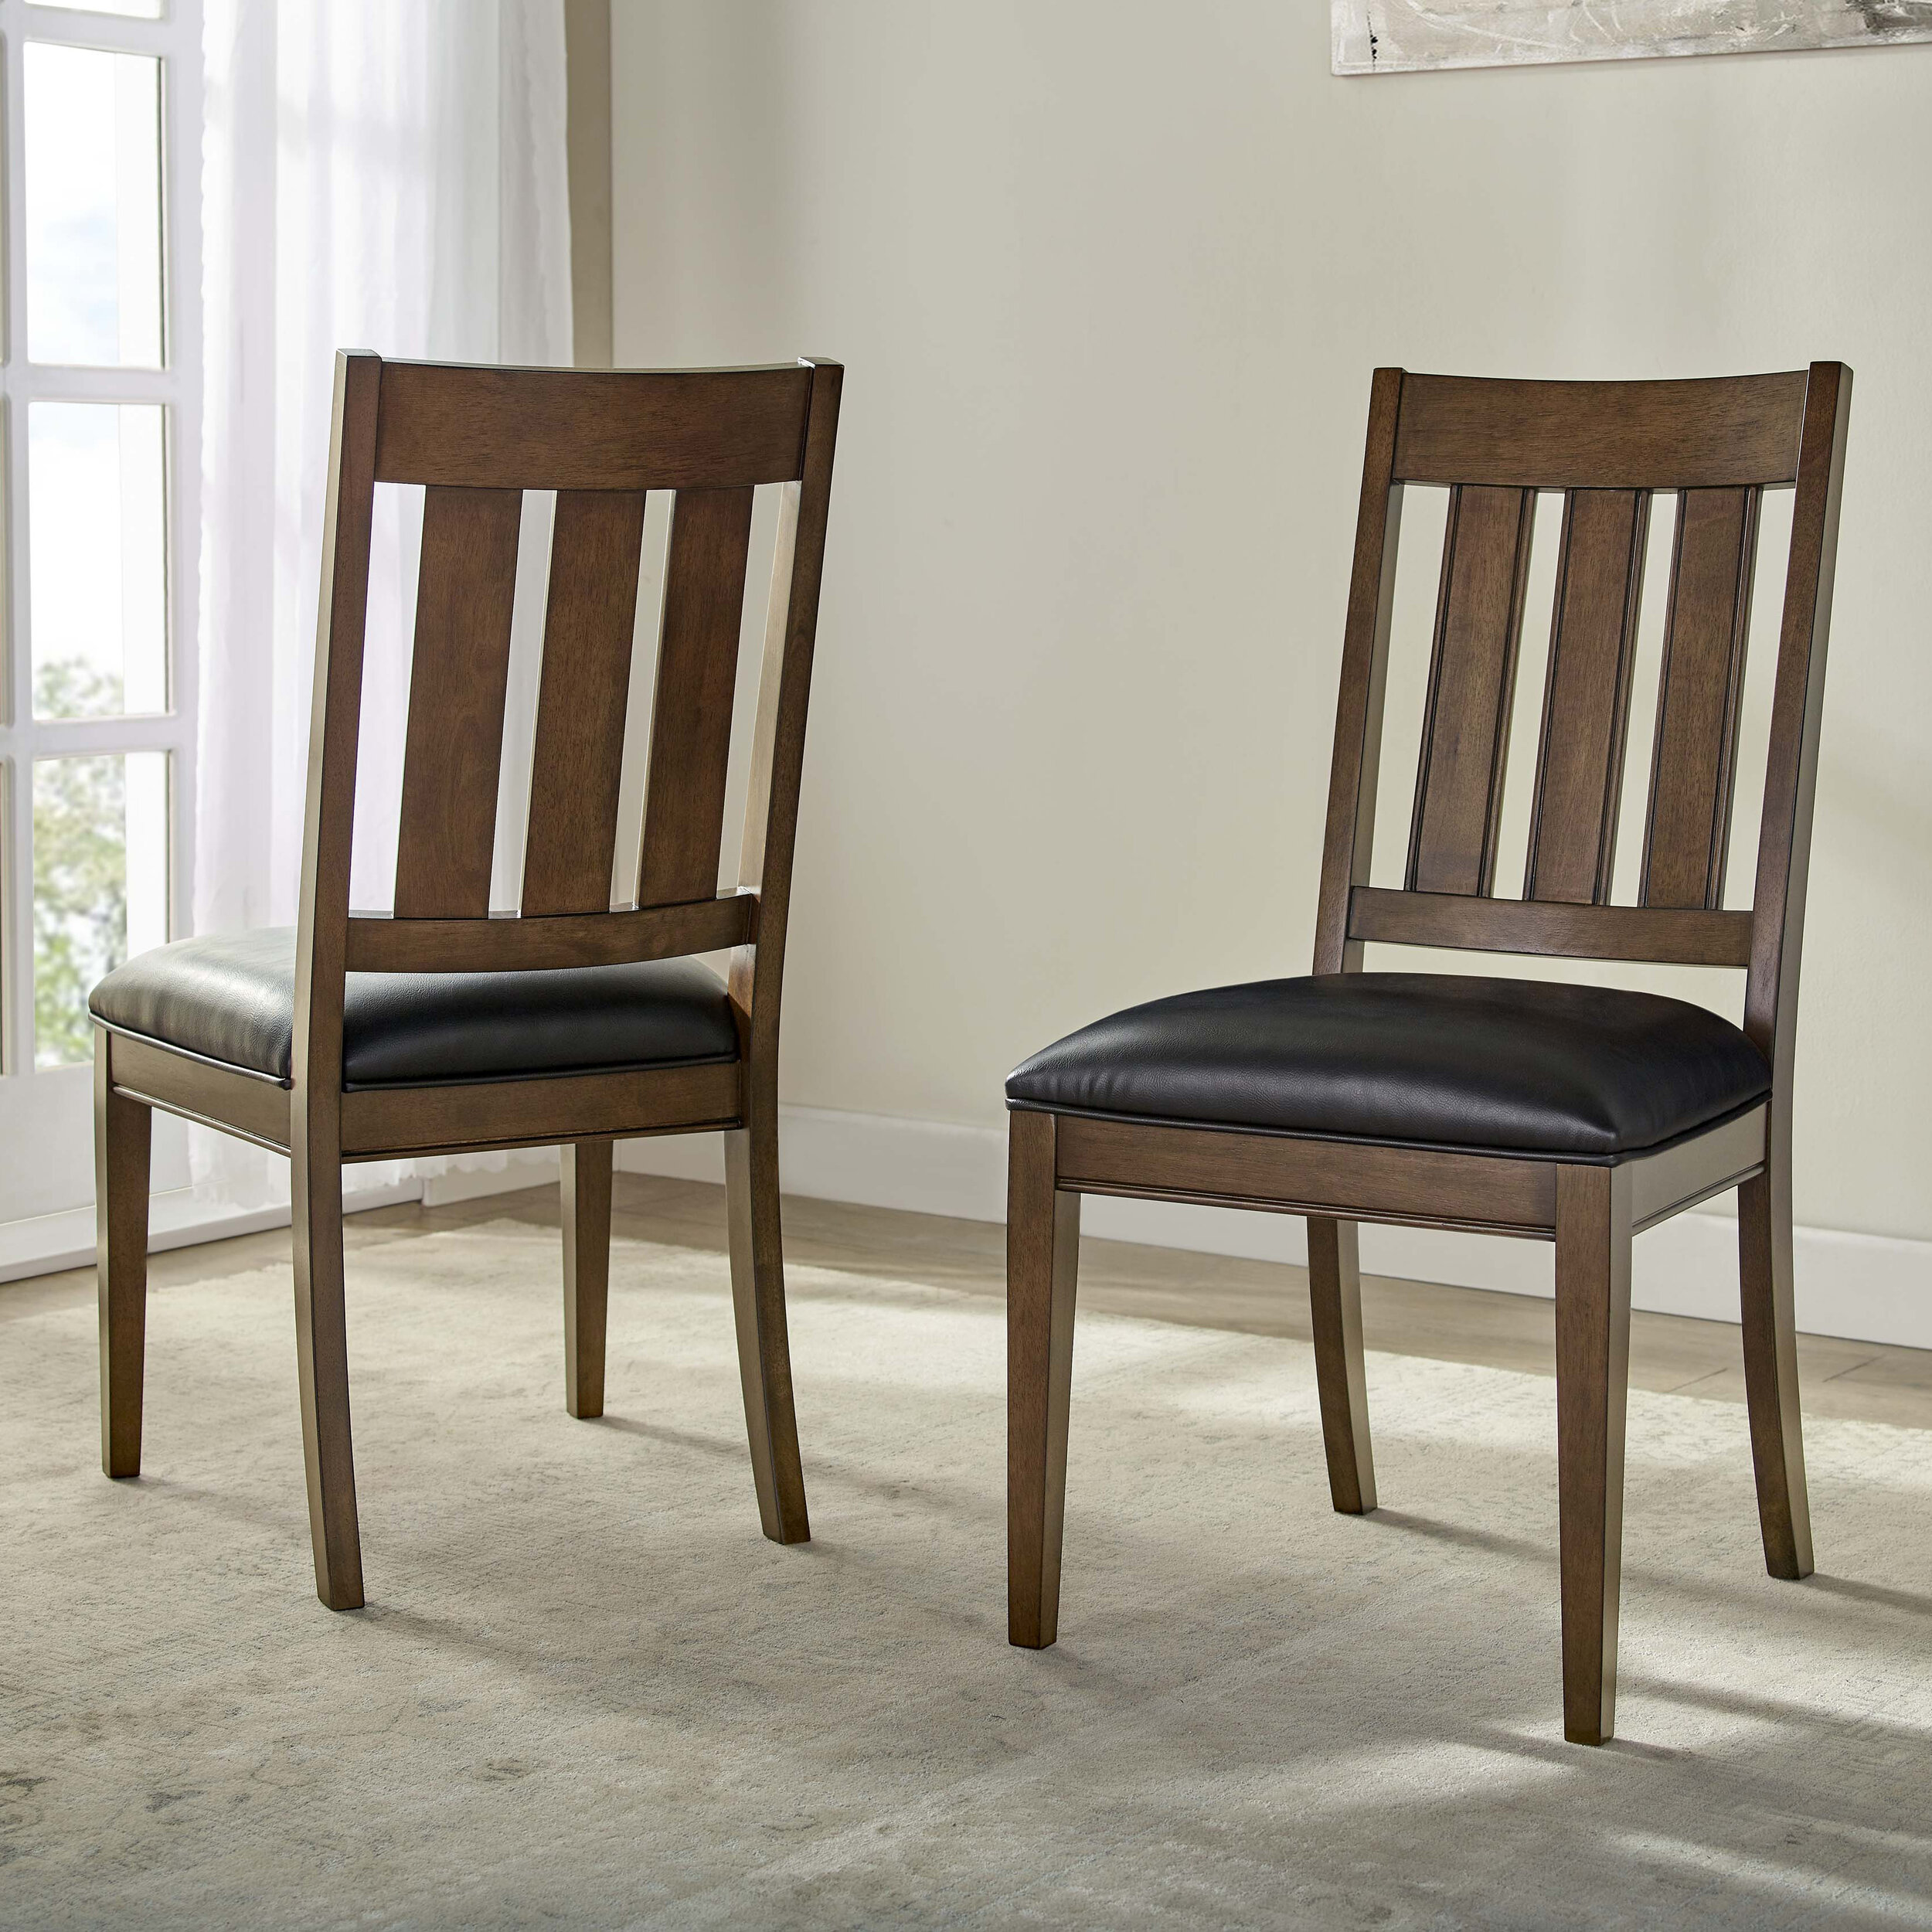 NorthridgeHome-1307404-Dining-Chairs-For-Web-V1-2019-06-28.jpg